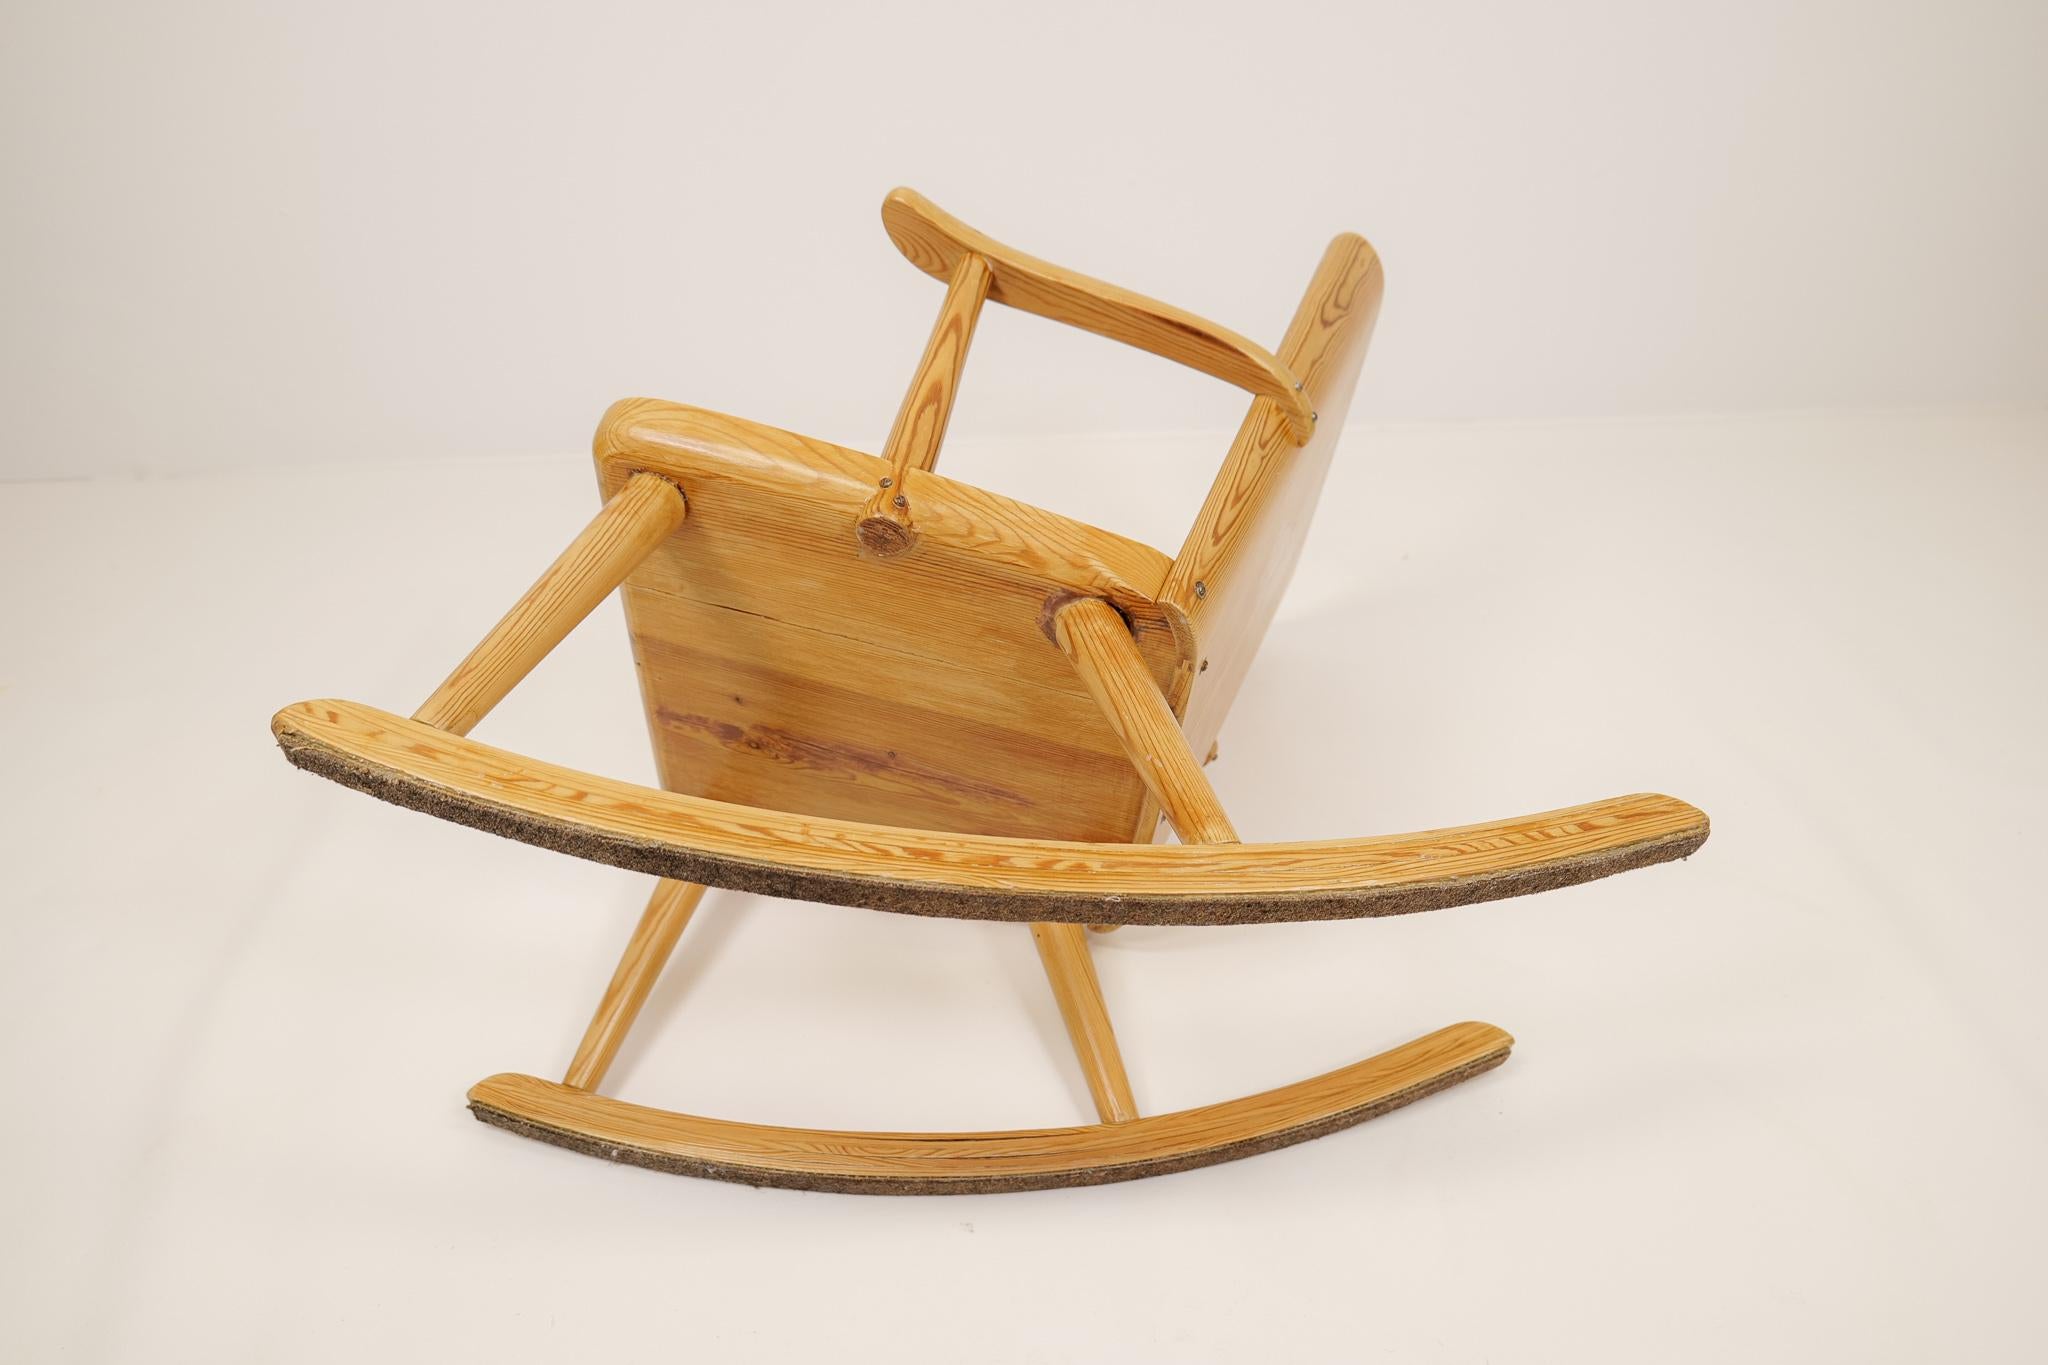 Midcentury Rocking Chair in Pine, Göran Malmvall, Sweden, 1940s For Sale 5